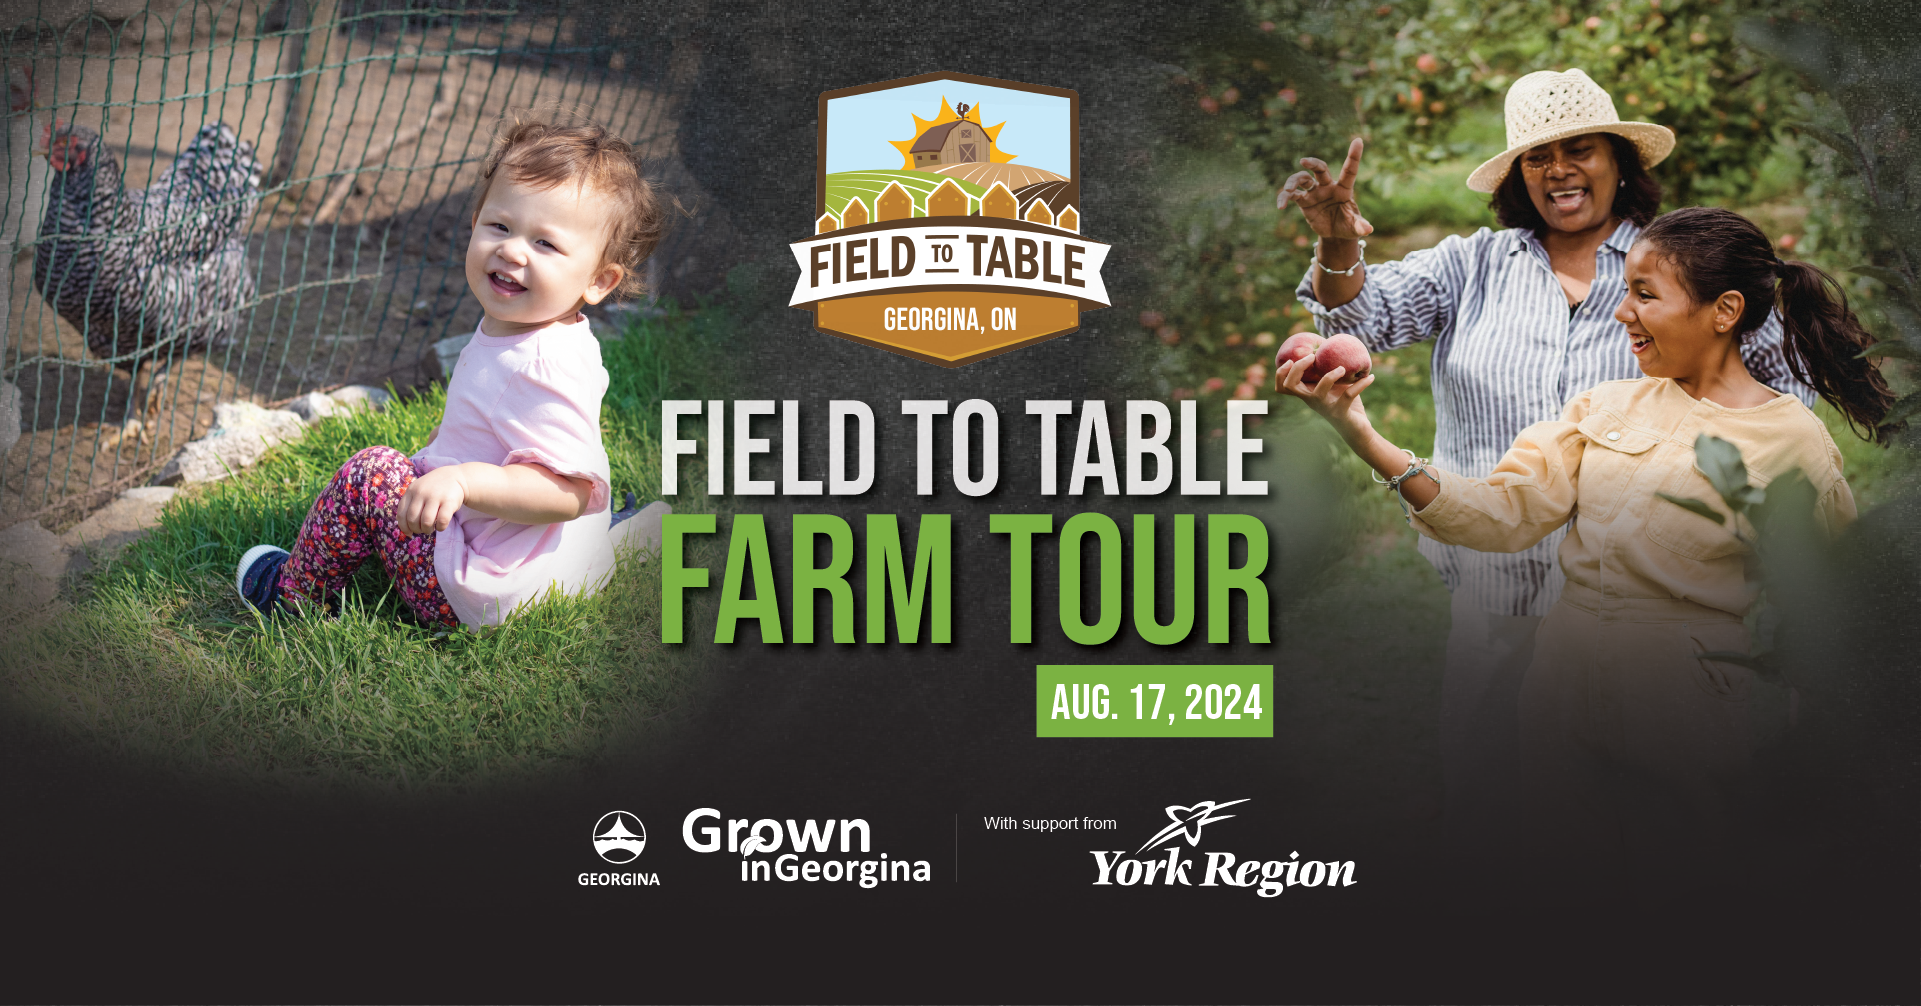 ad showing kids and family enjoying life on the farm in georgina